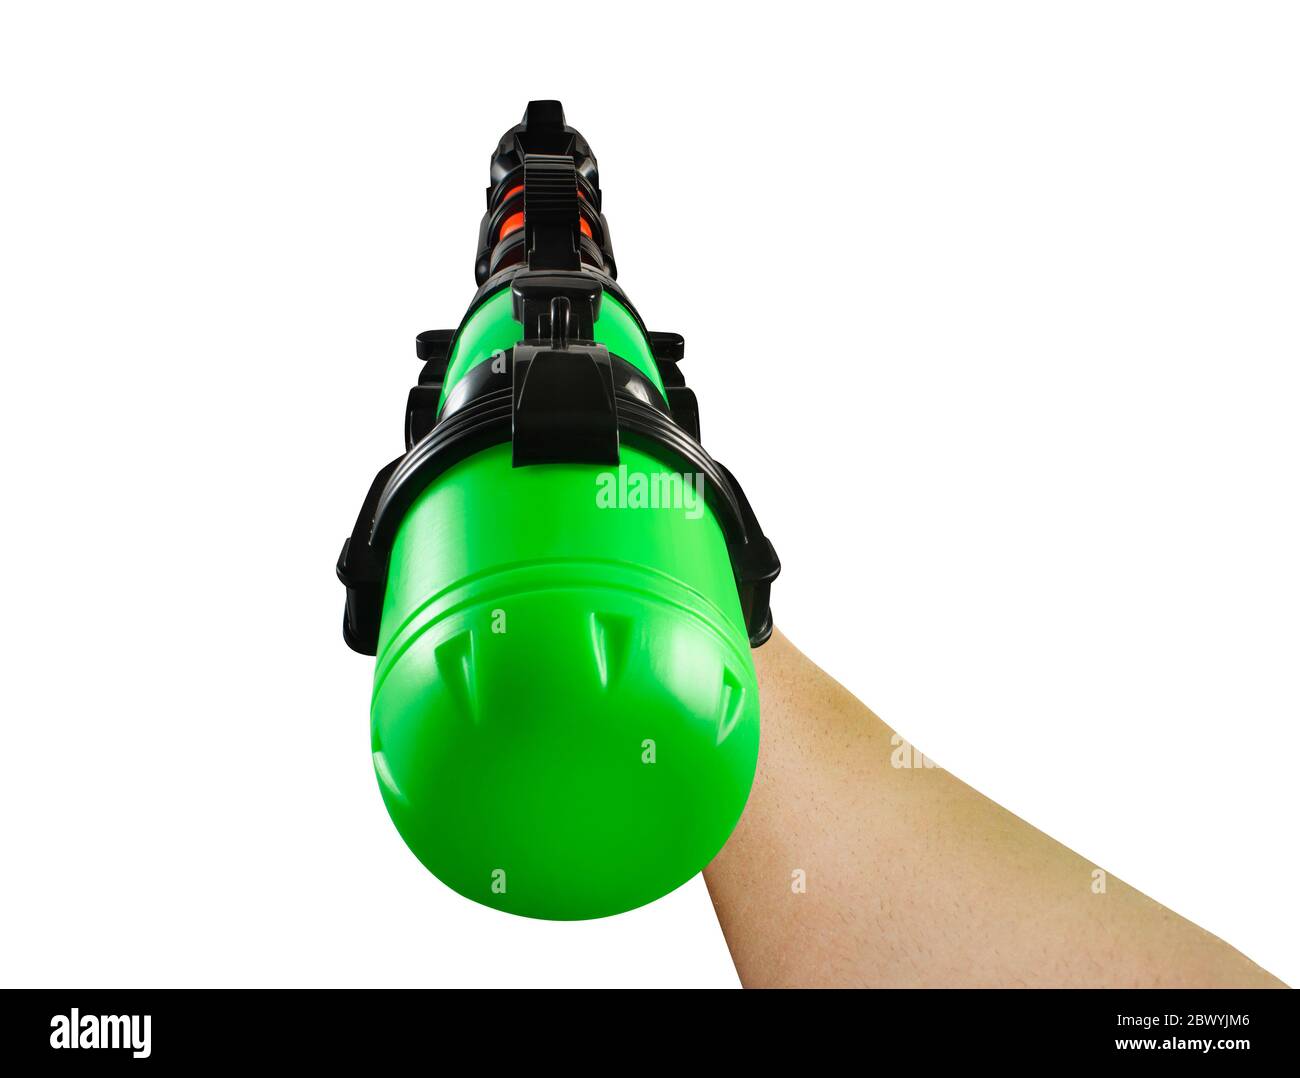 Isolated photo of hand holding a plastic multi-colored water pistol on white background first person view. Stock Photo